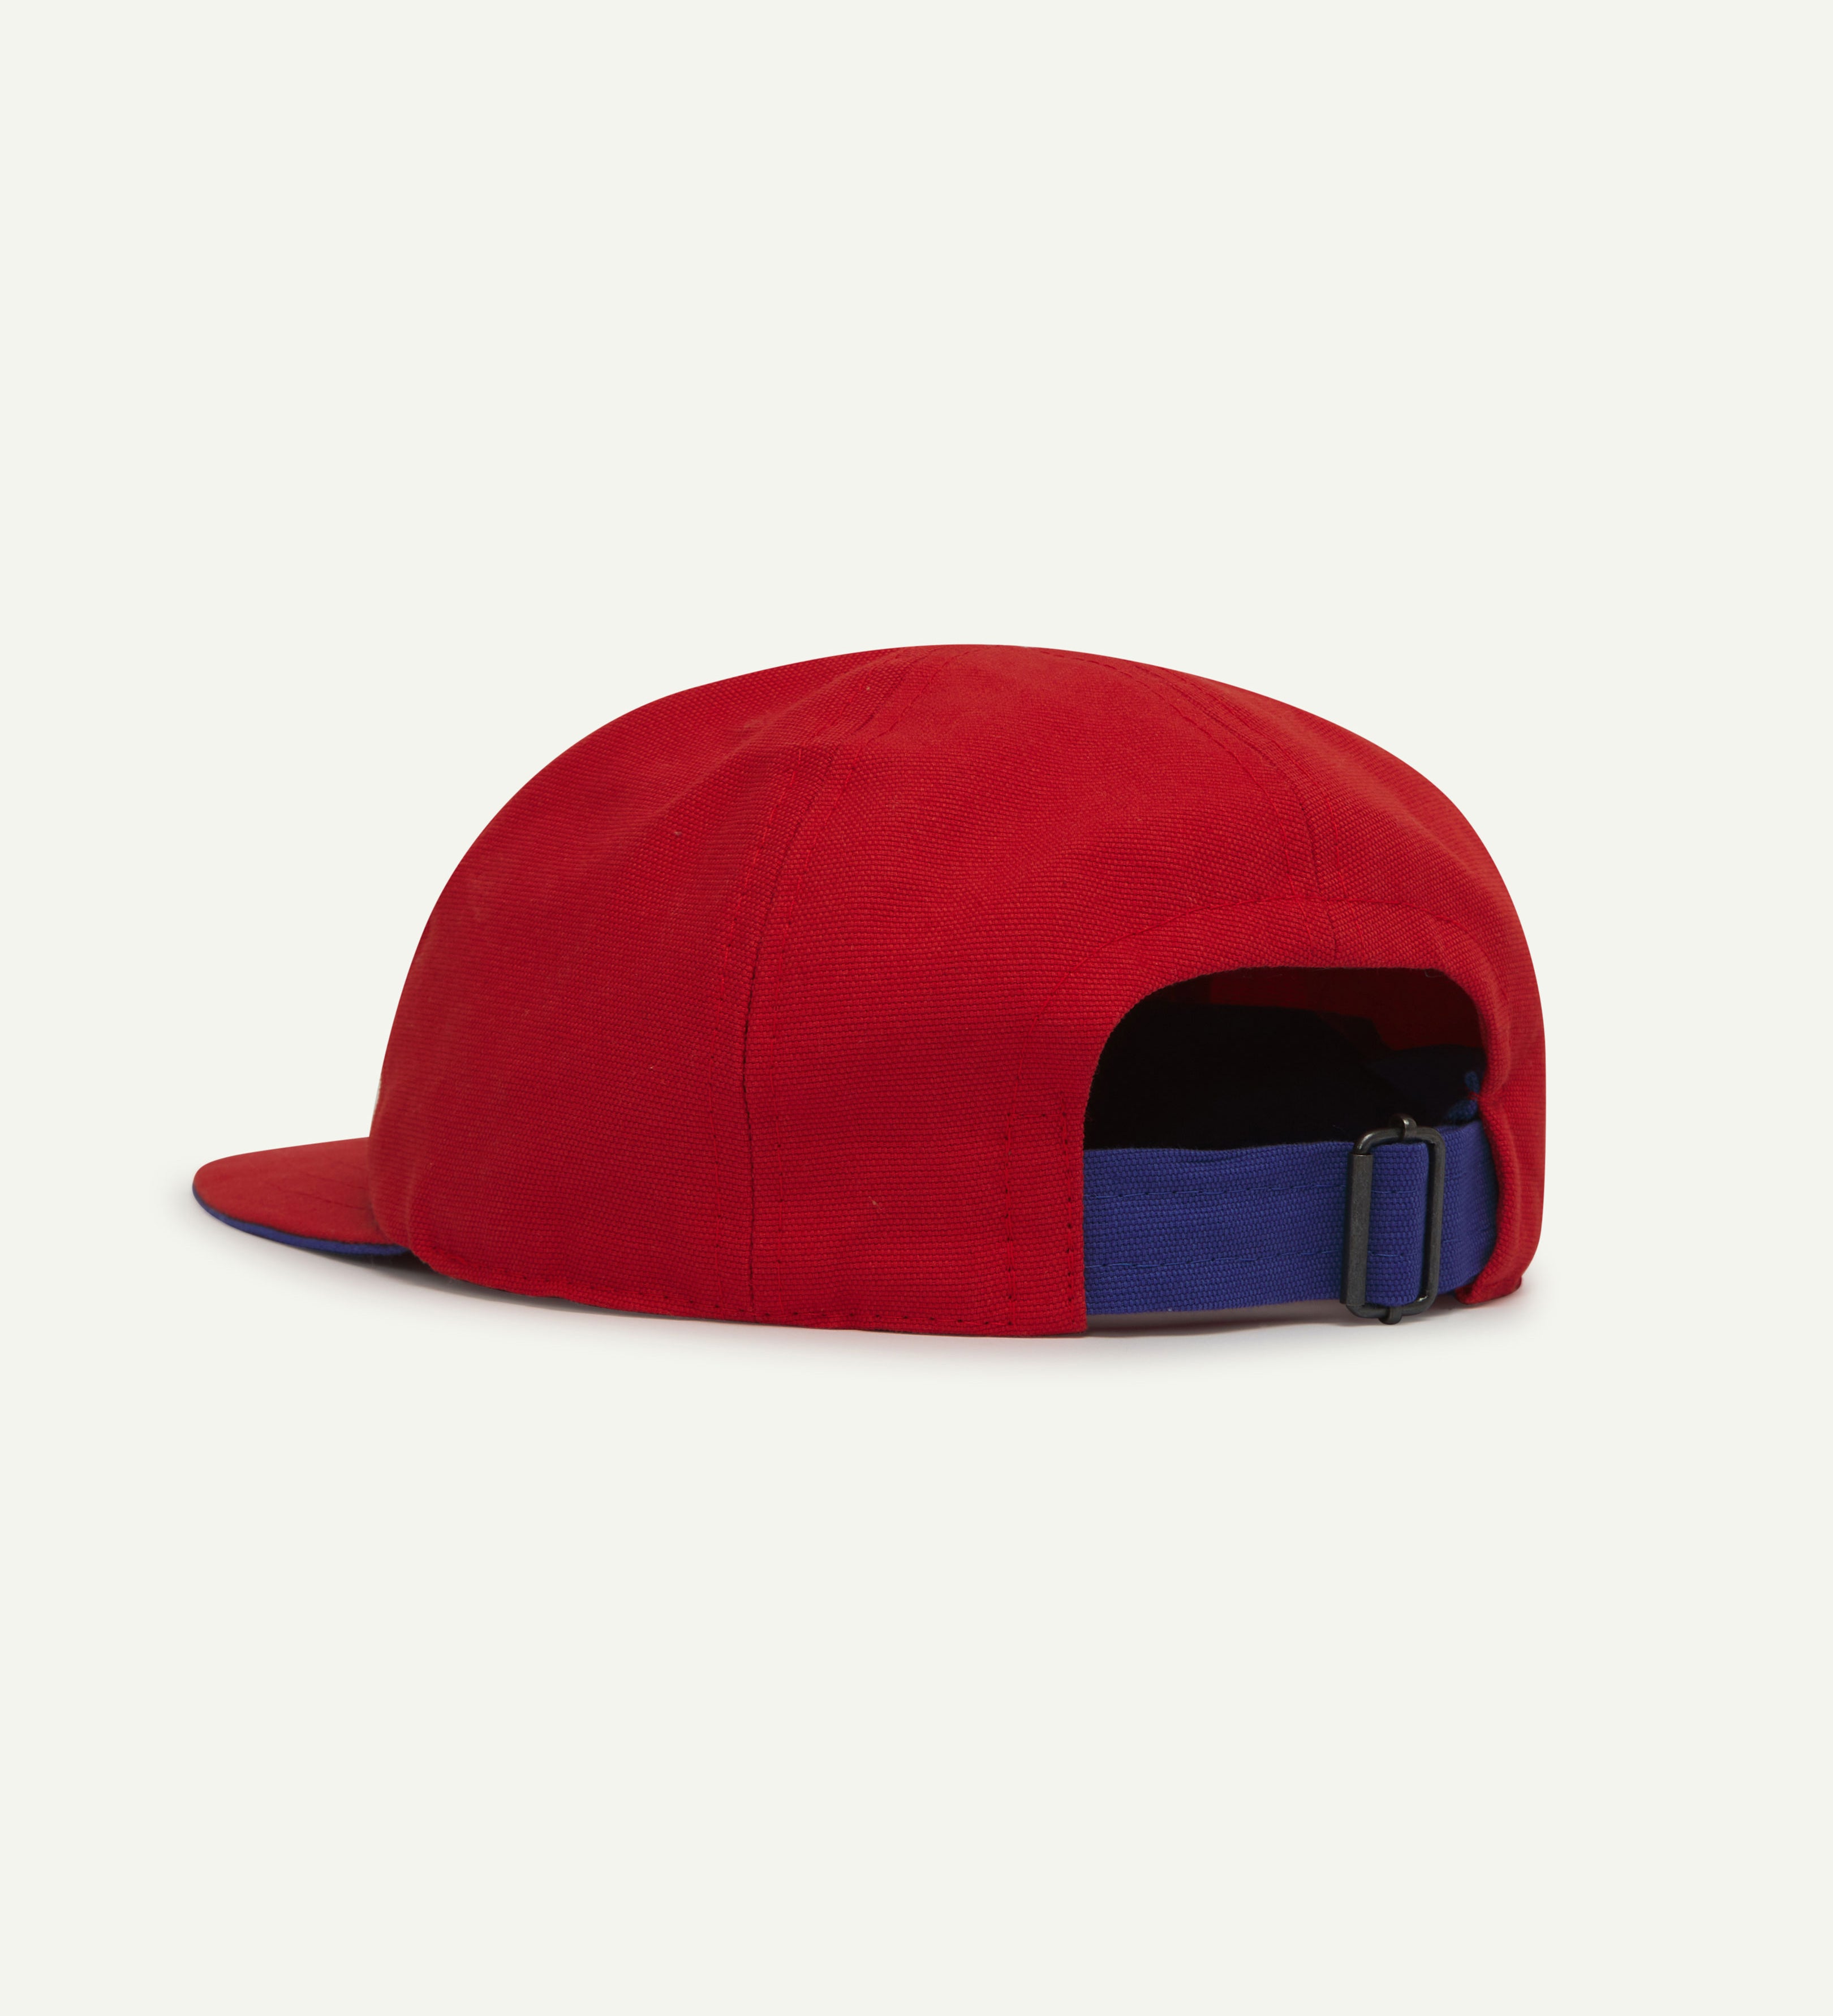 Angled back view of Uskees deadstock 6-panel cap in bright red showing contrast blue adjuster loop.